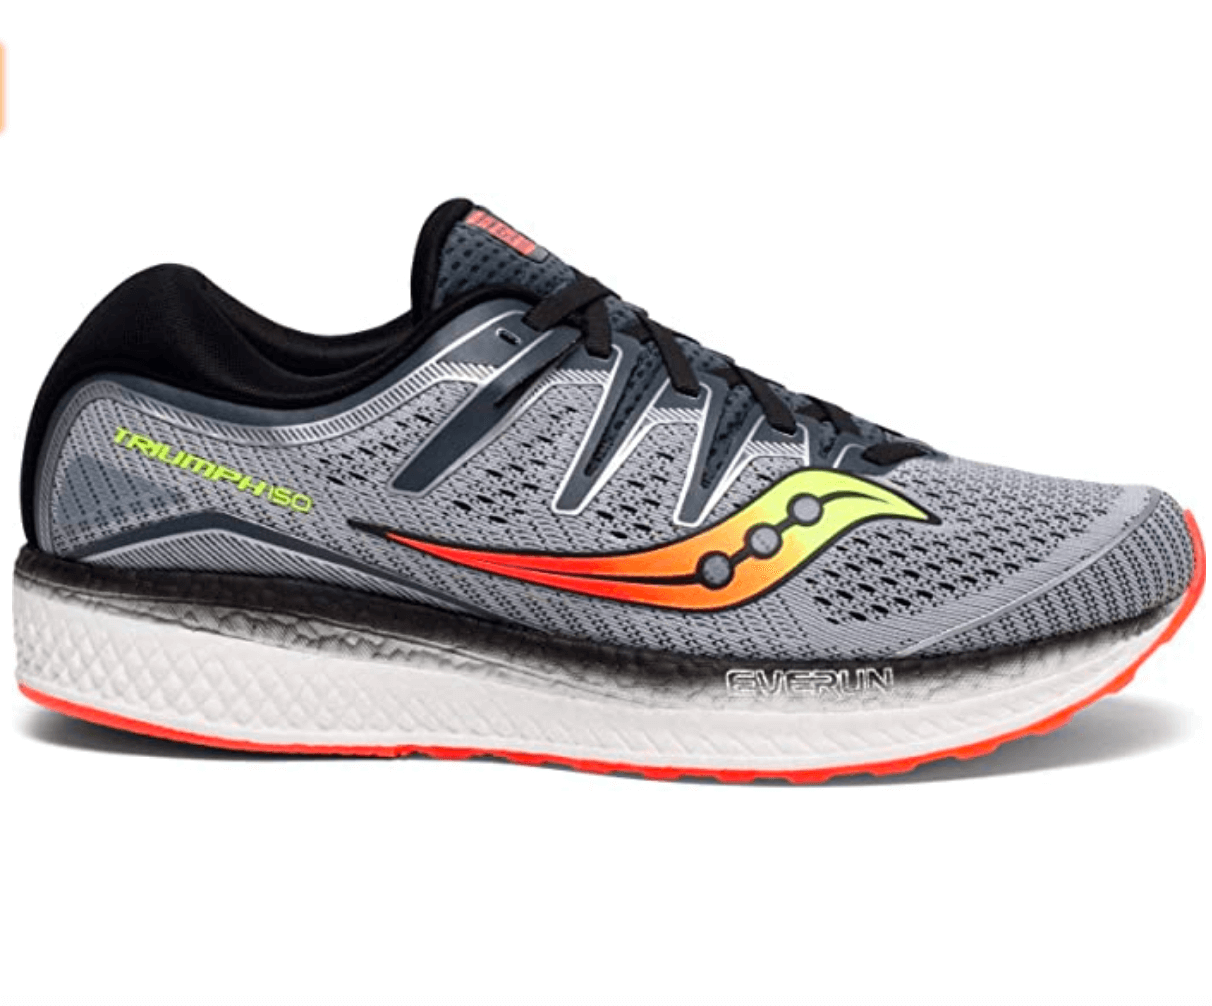 10 Best Most Comfortable Running Shoes Reviewed in 2022 | WJR